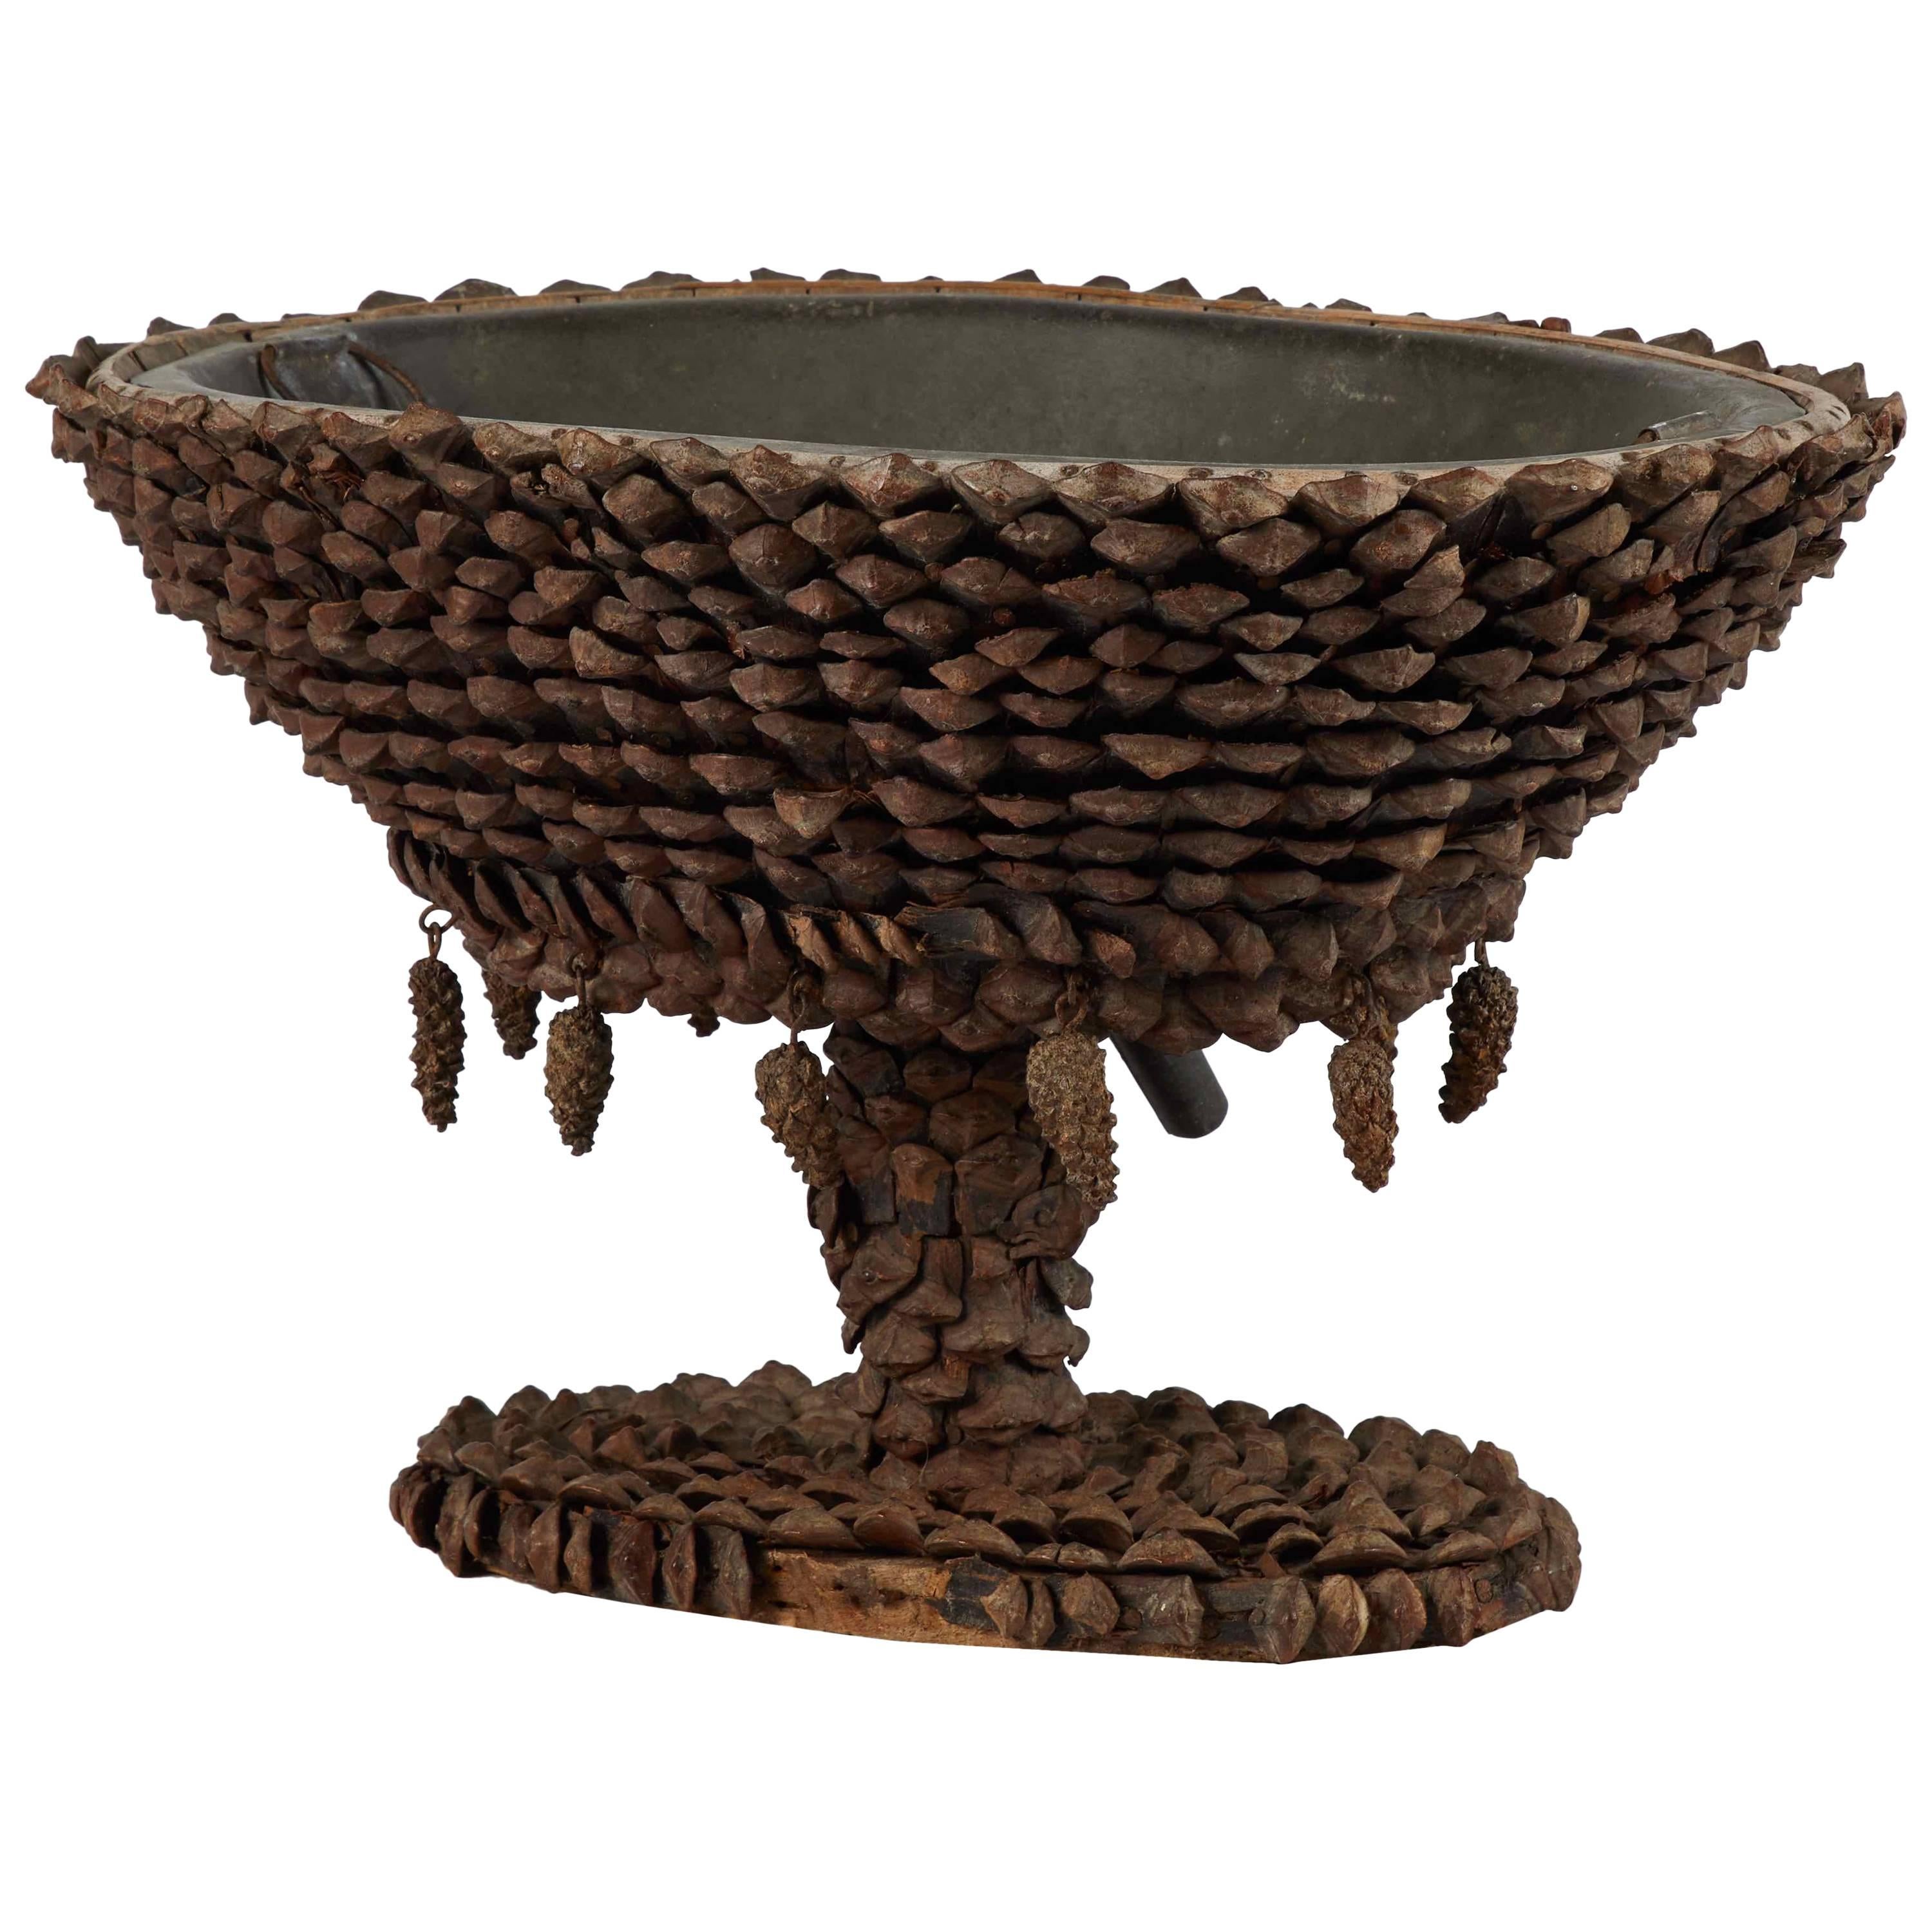 Cooler Tazza Decorated in Pine Cones from Mid-19th Century France